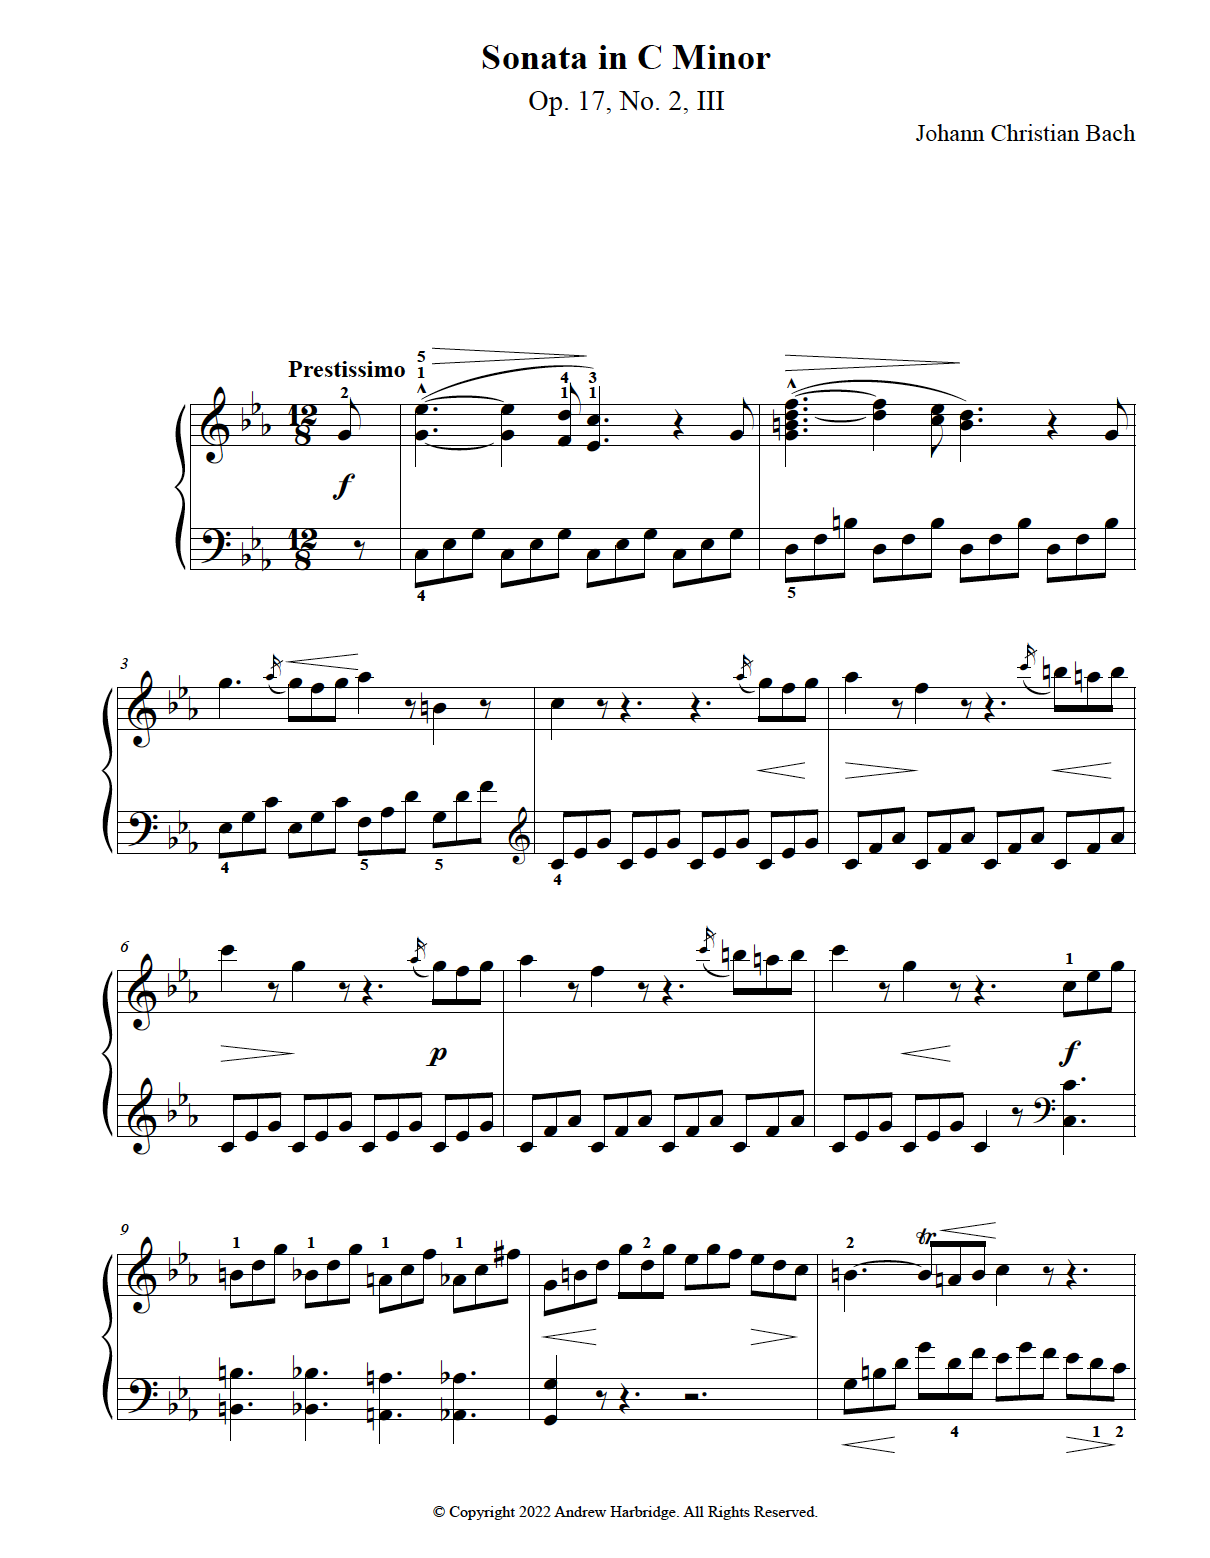 Sample of Sonata in C Minor op. 17, No. 2, III composed by J.C. Bach